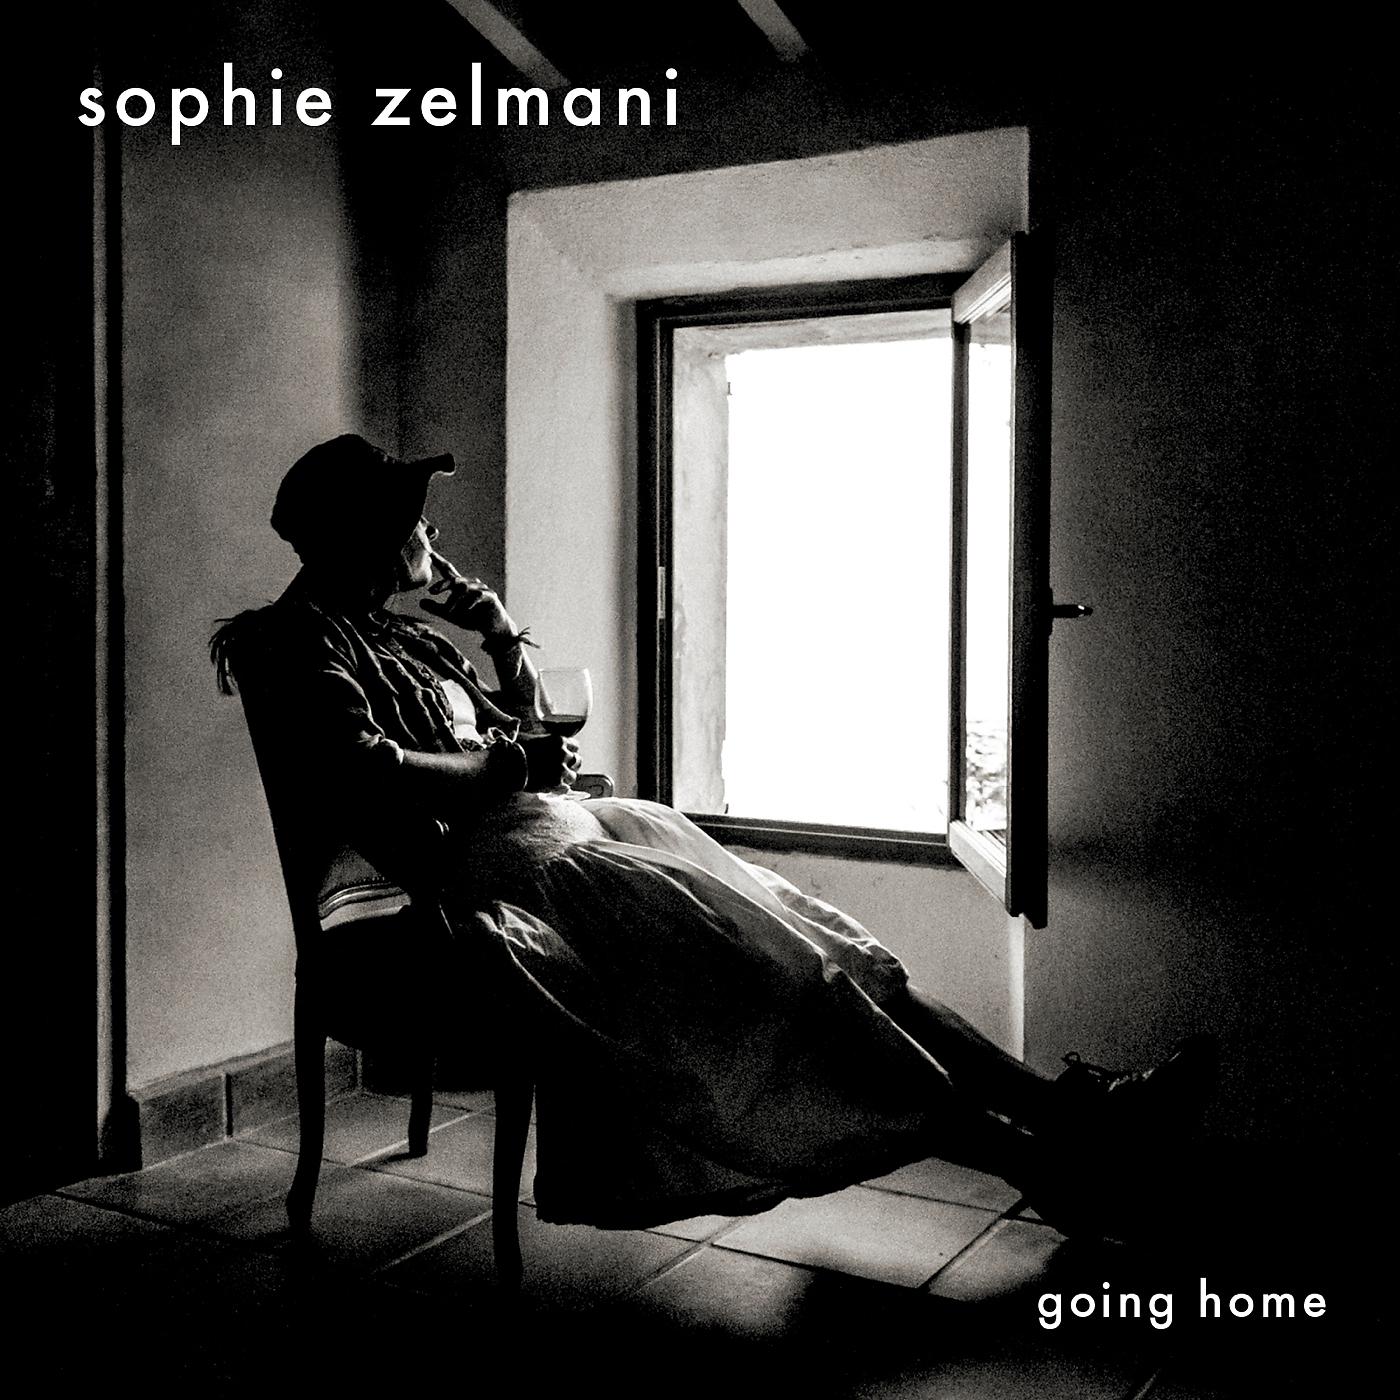 Going home music. Софи Зелмани. Sophie Zelmani -Bright Eyes. Sophie Zelmani альбом Memory Loves you.